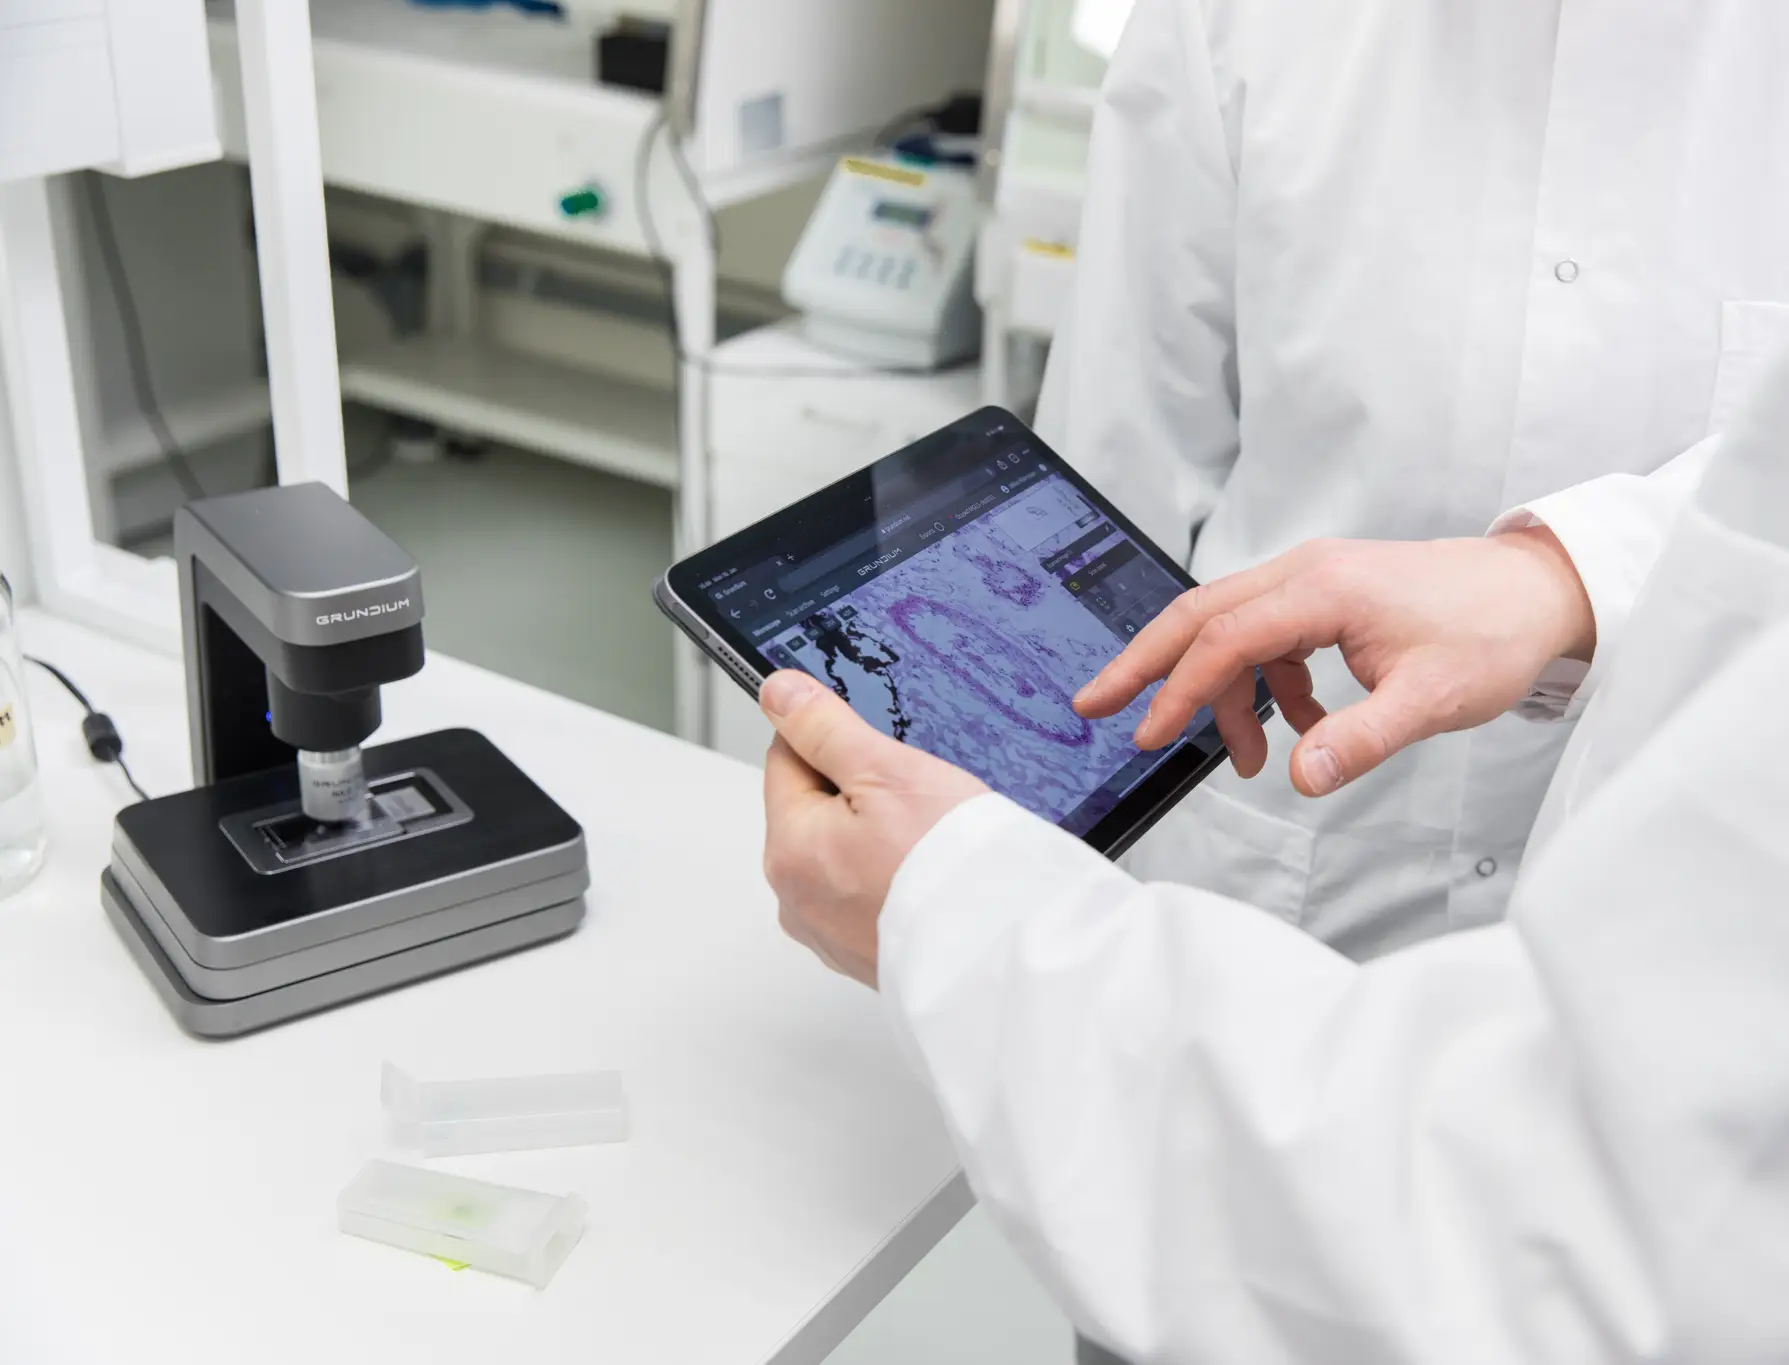 A pathologist in laboratory environment using an iPad to review a sample scanned with the Ocus scanner on the desk